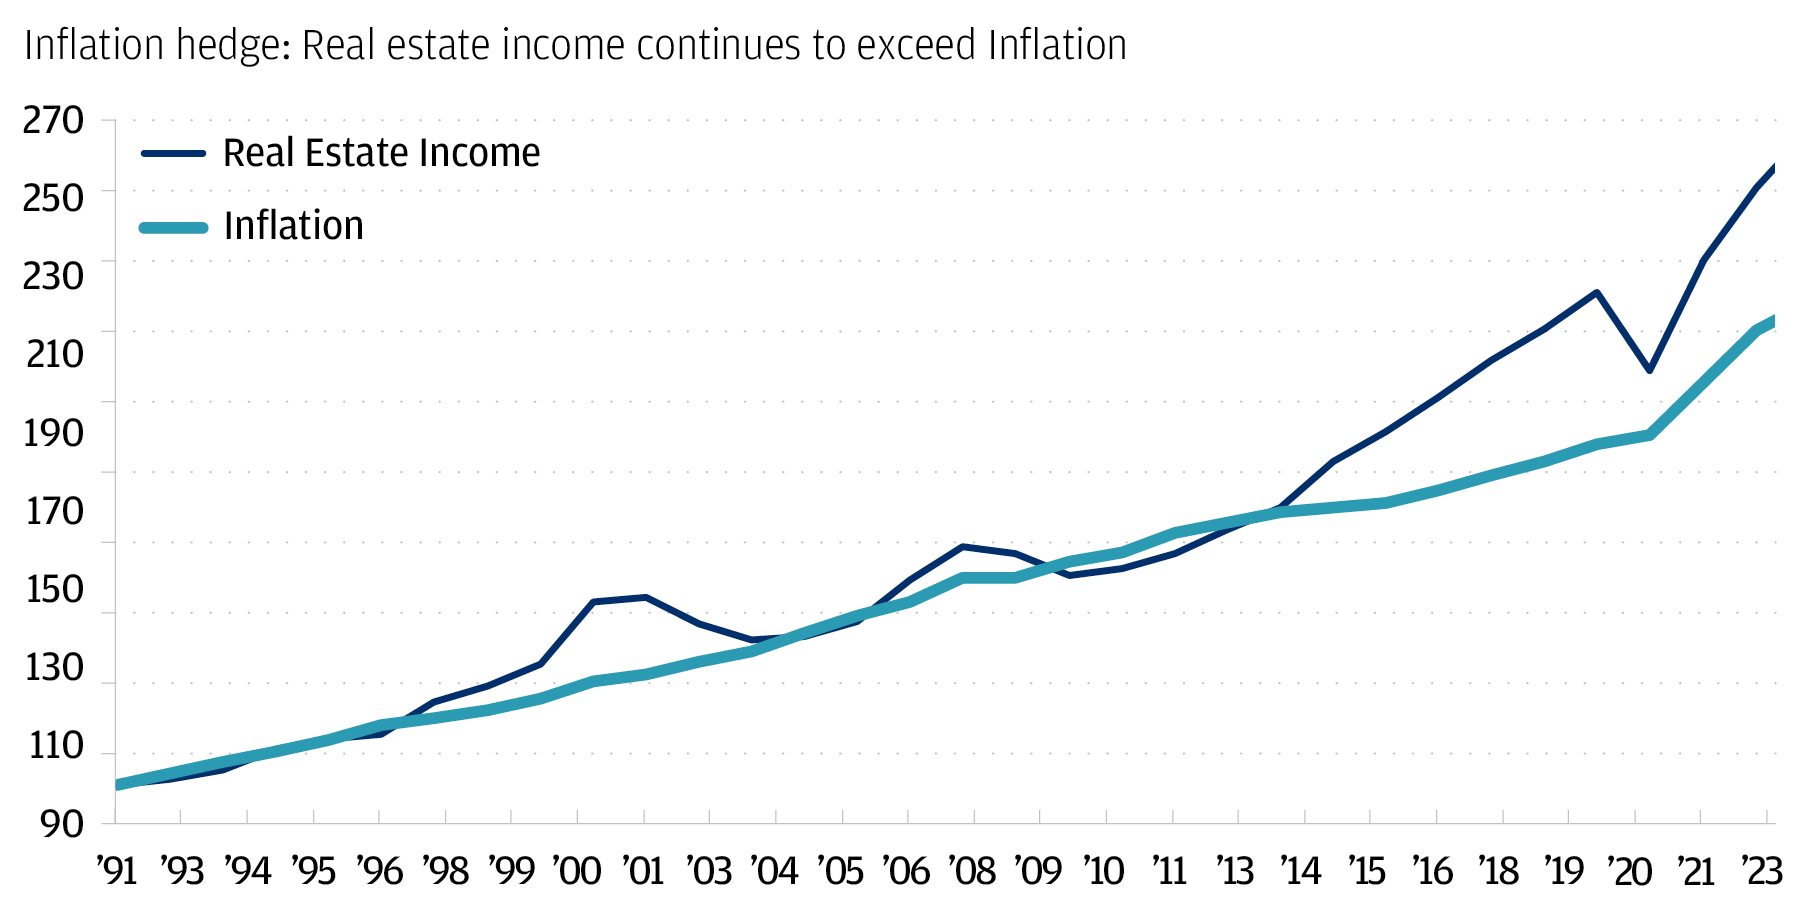 This line chart shows real estate income and inflation from 1991 to 2023. The data shows that real estate income has generally outpaced inflation over the past 30 years, according to J.P. Morgan Asset Management GRA Research.